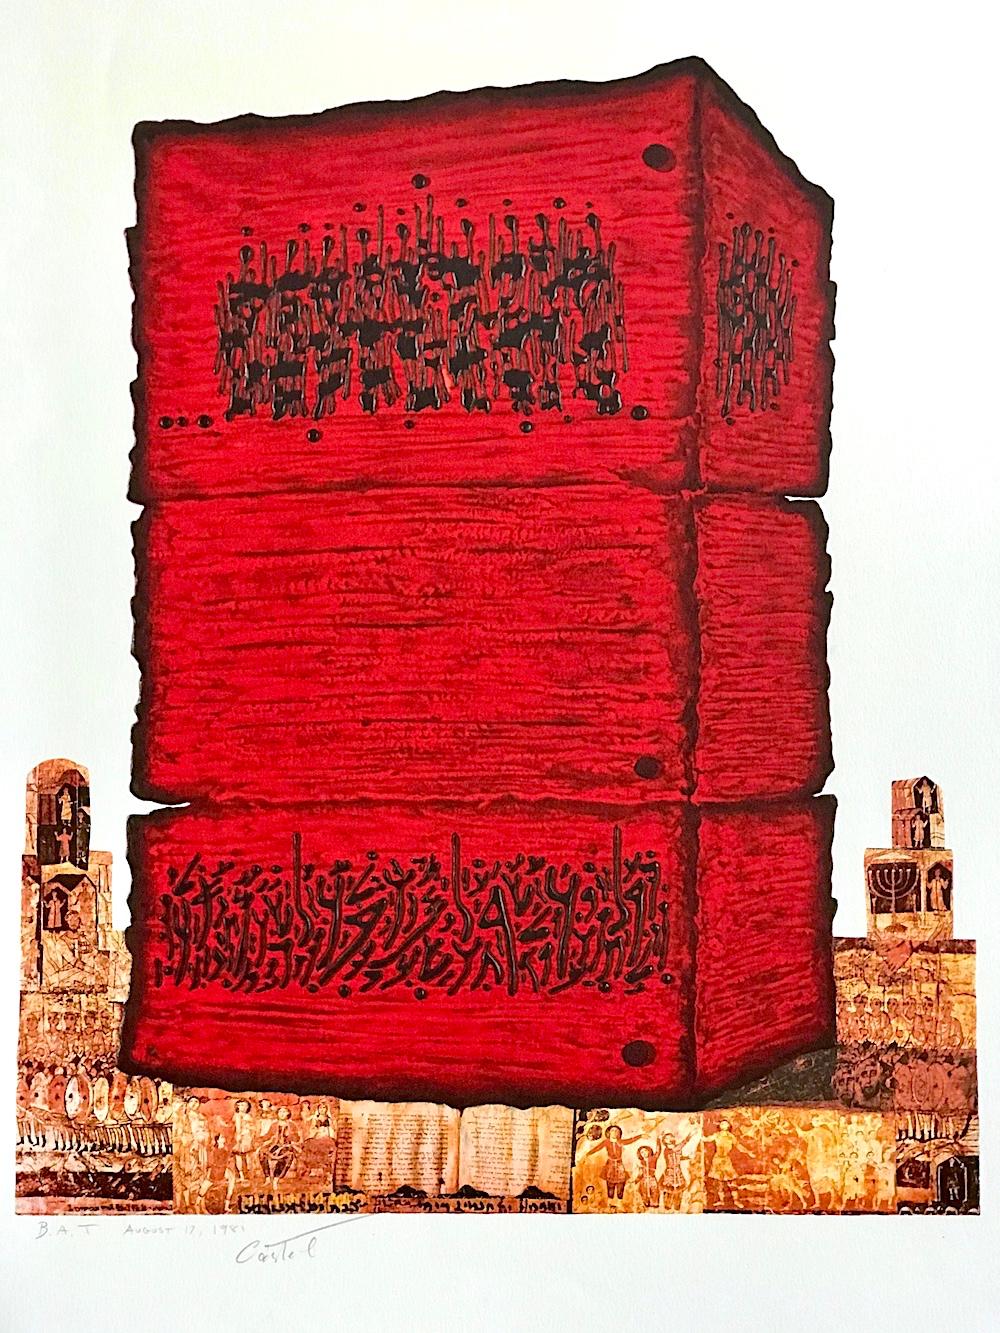 Moshe Castel Abstract Print - STONE OF THE TEMPLE Signed Lithograph, Ancient Jewish History, Red, Gold, Black